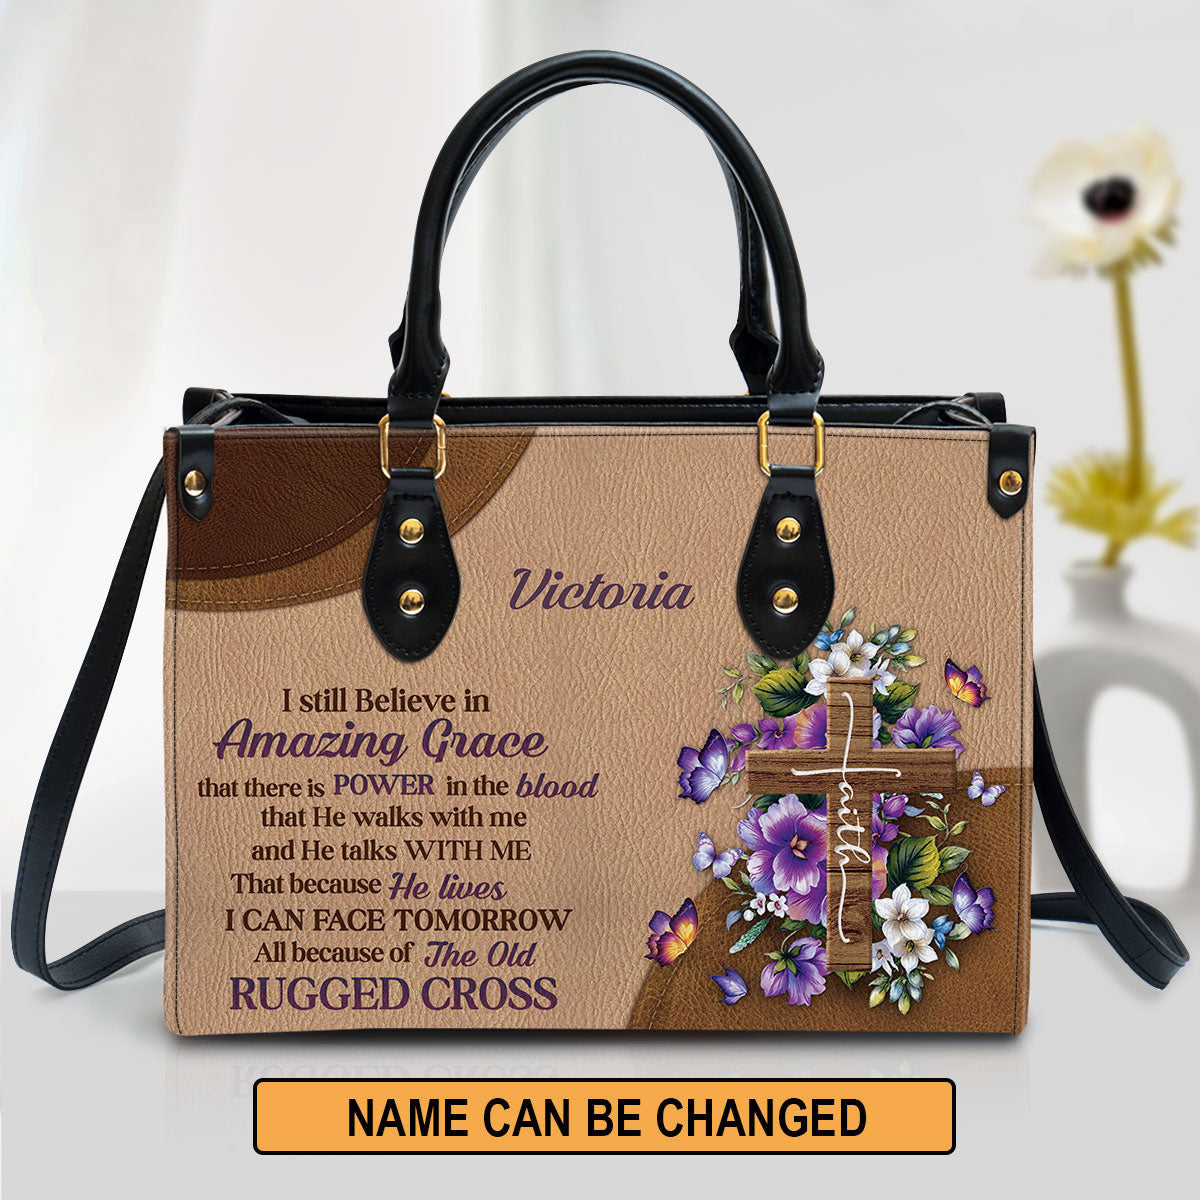 I Still Believe In Amazing Grace Leather Bag - Custom Name Floral Cross Leather Handbag - Christian Gifts For Women